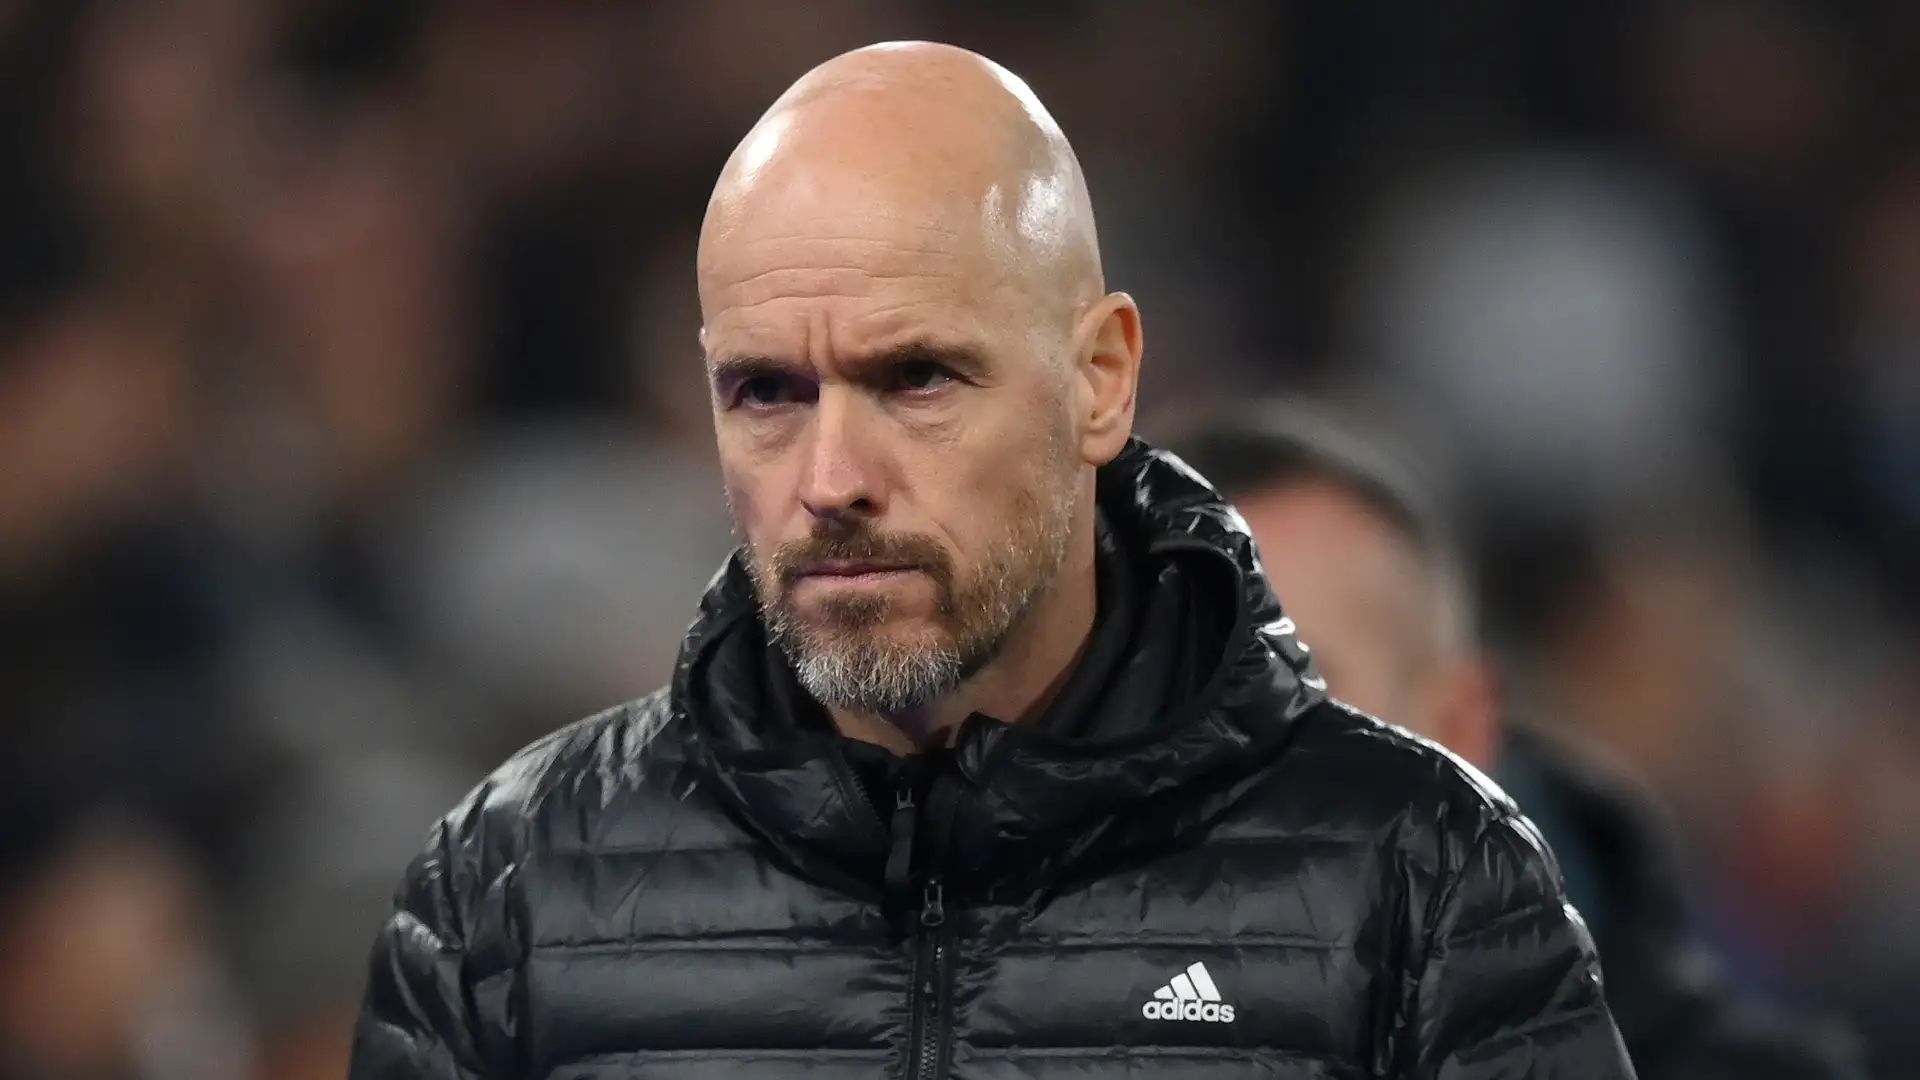 Man Utd boss Erik ten Hag slams critics who 'don't have any knowledge of football' as Dutchman launches impassioned defence of managerial record